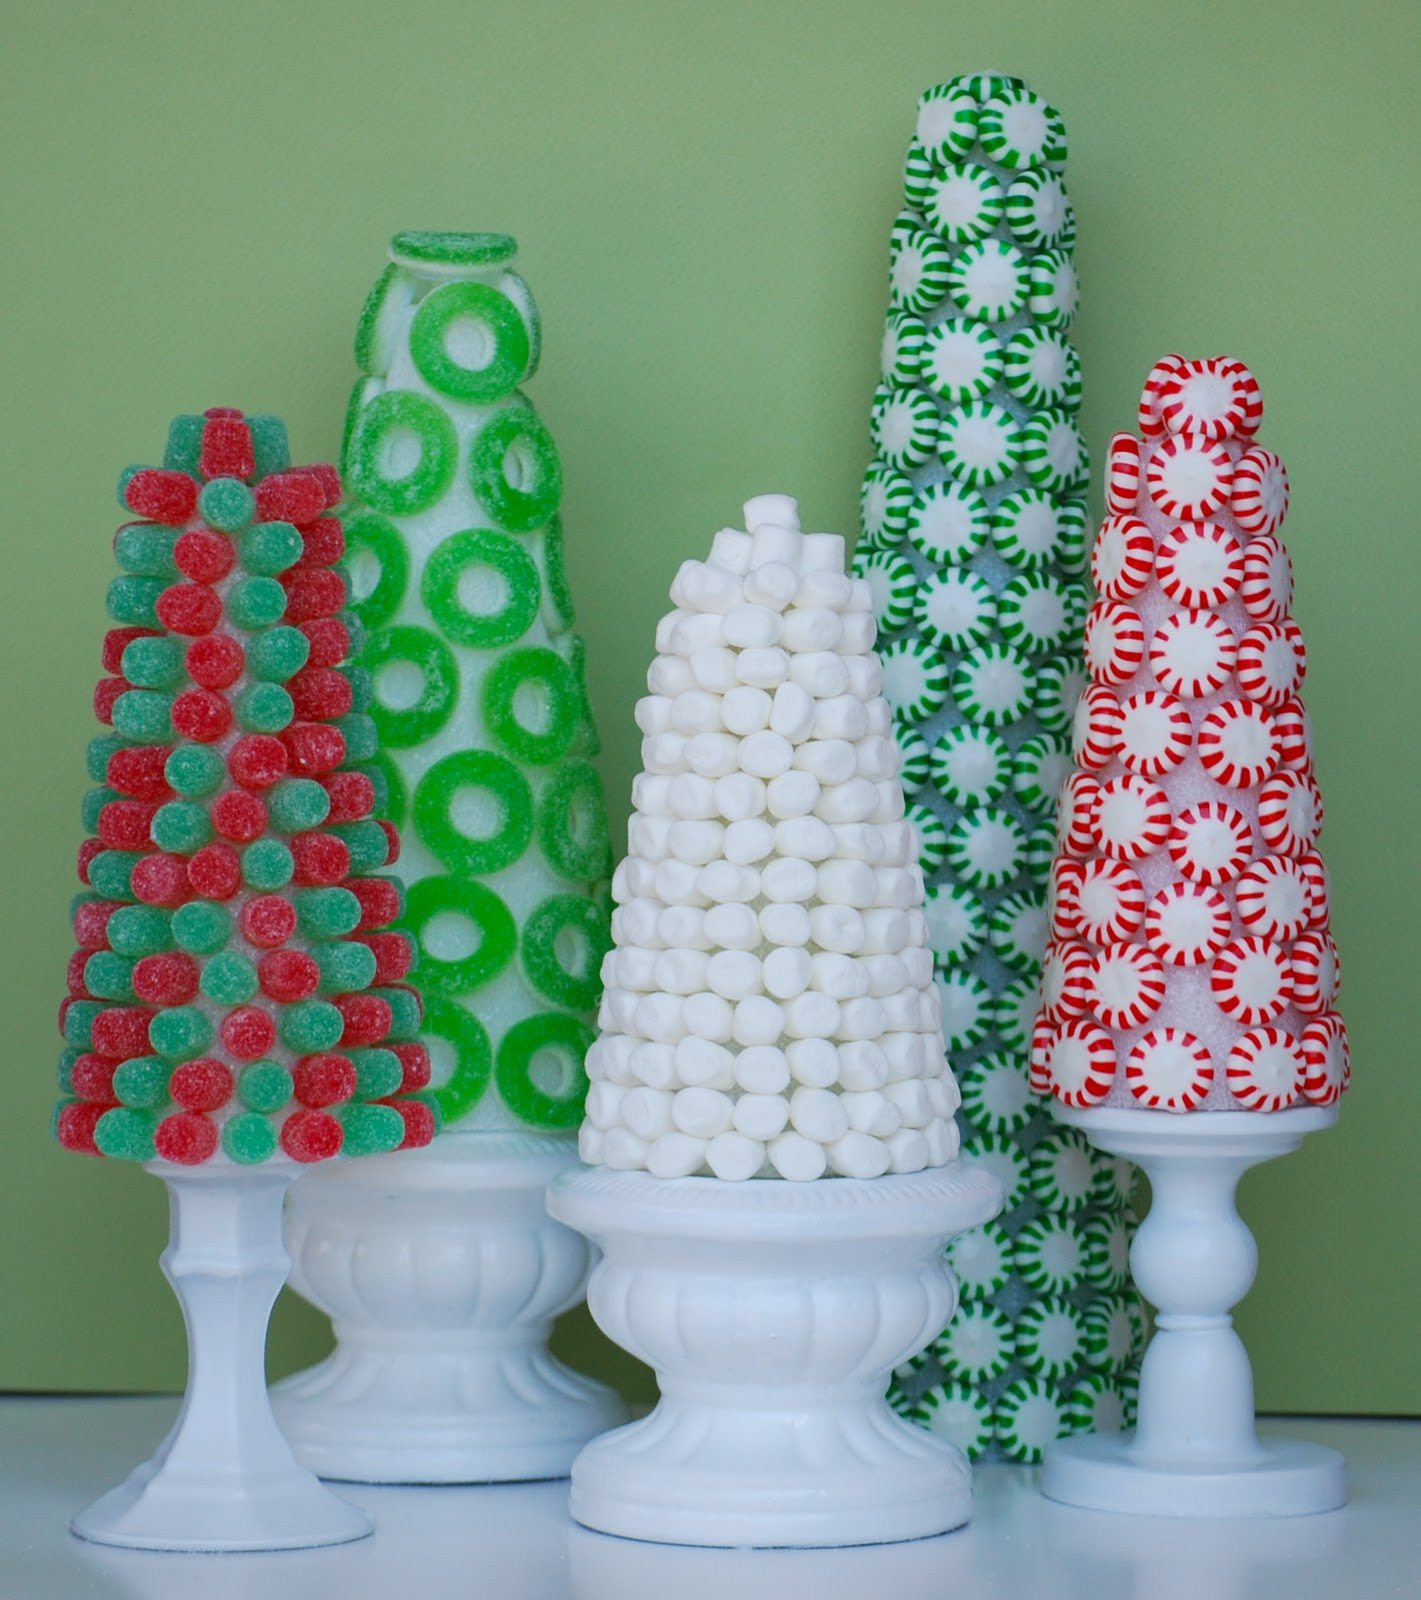 Christmas Candy Crafts
 The Sweetest Christmas Craft Candy Trees